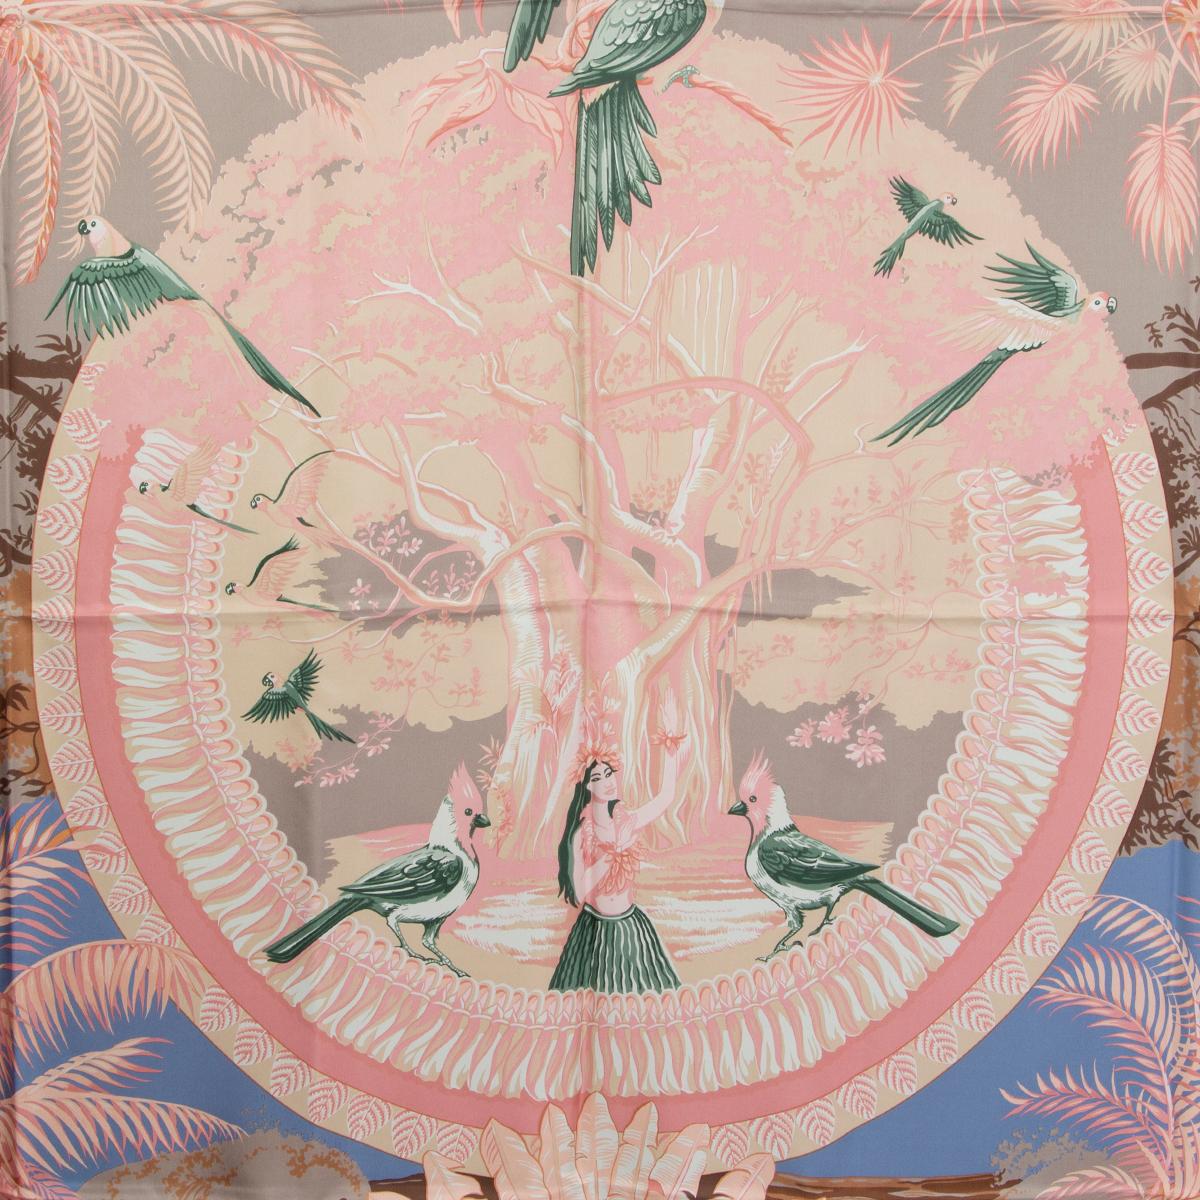 Hermès 'Aloha 140' scarf by Laurence Bourthoumieux in baby pink silk twill (100%) and details in nude, pale rose, pale light blue, light brown, mustard, taupe, black, off-white, pale blue and brown. Has been worn and is in excellent condition.